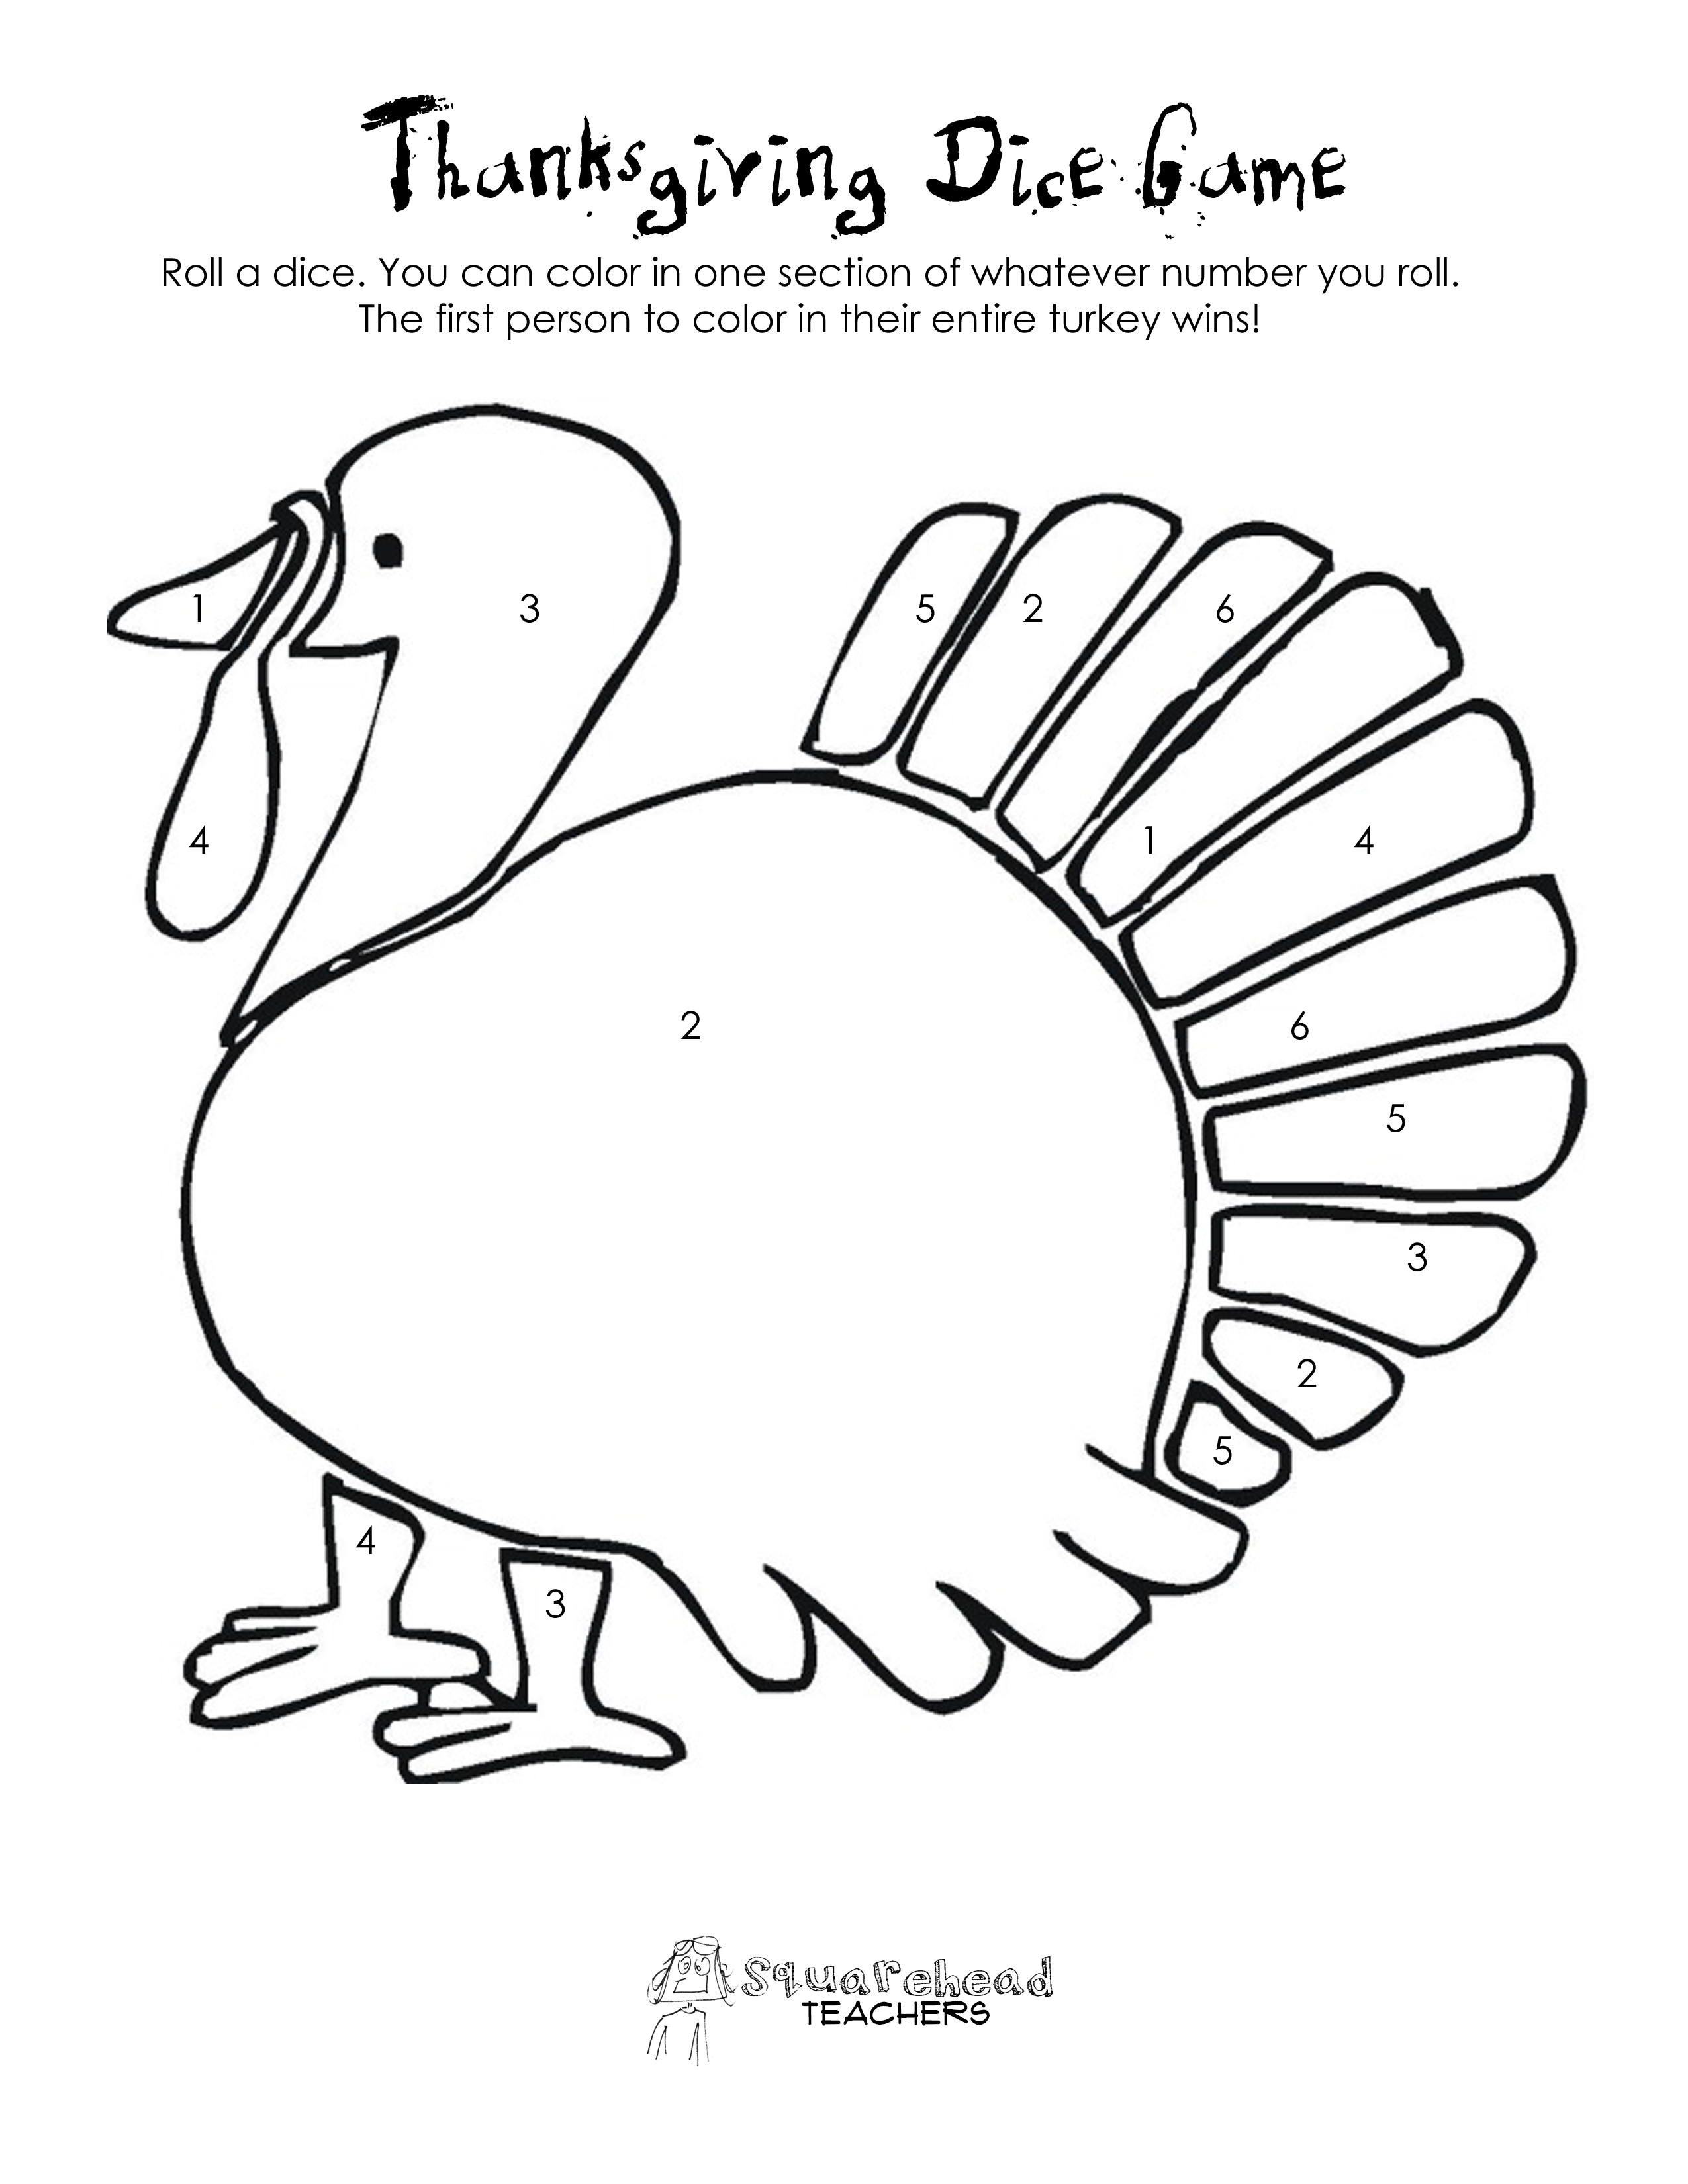 11 Free Thanksgiving Color By Number Pages For Kids